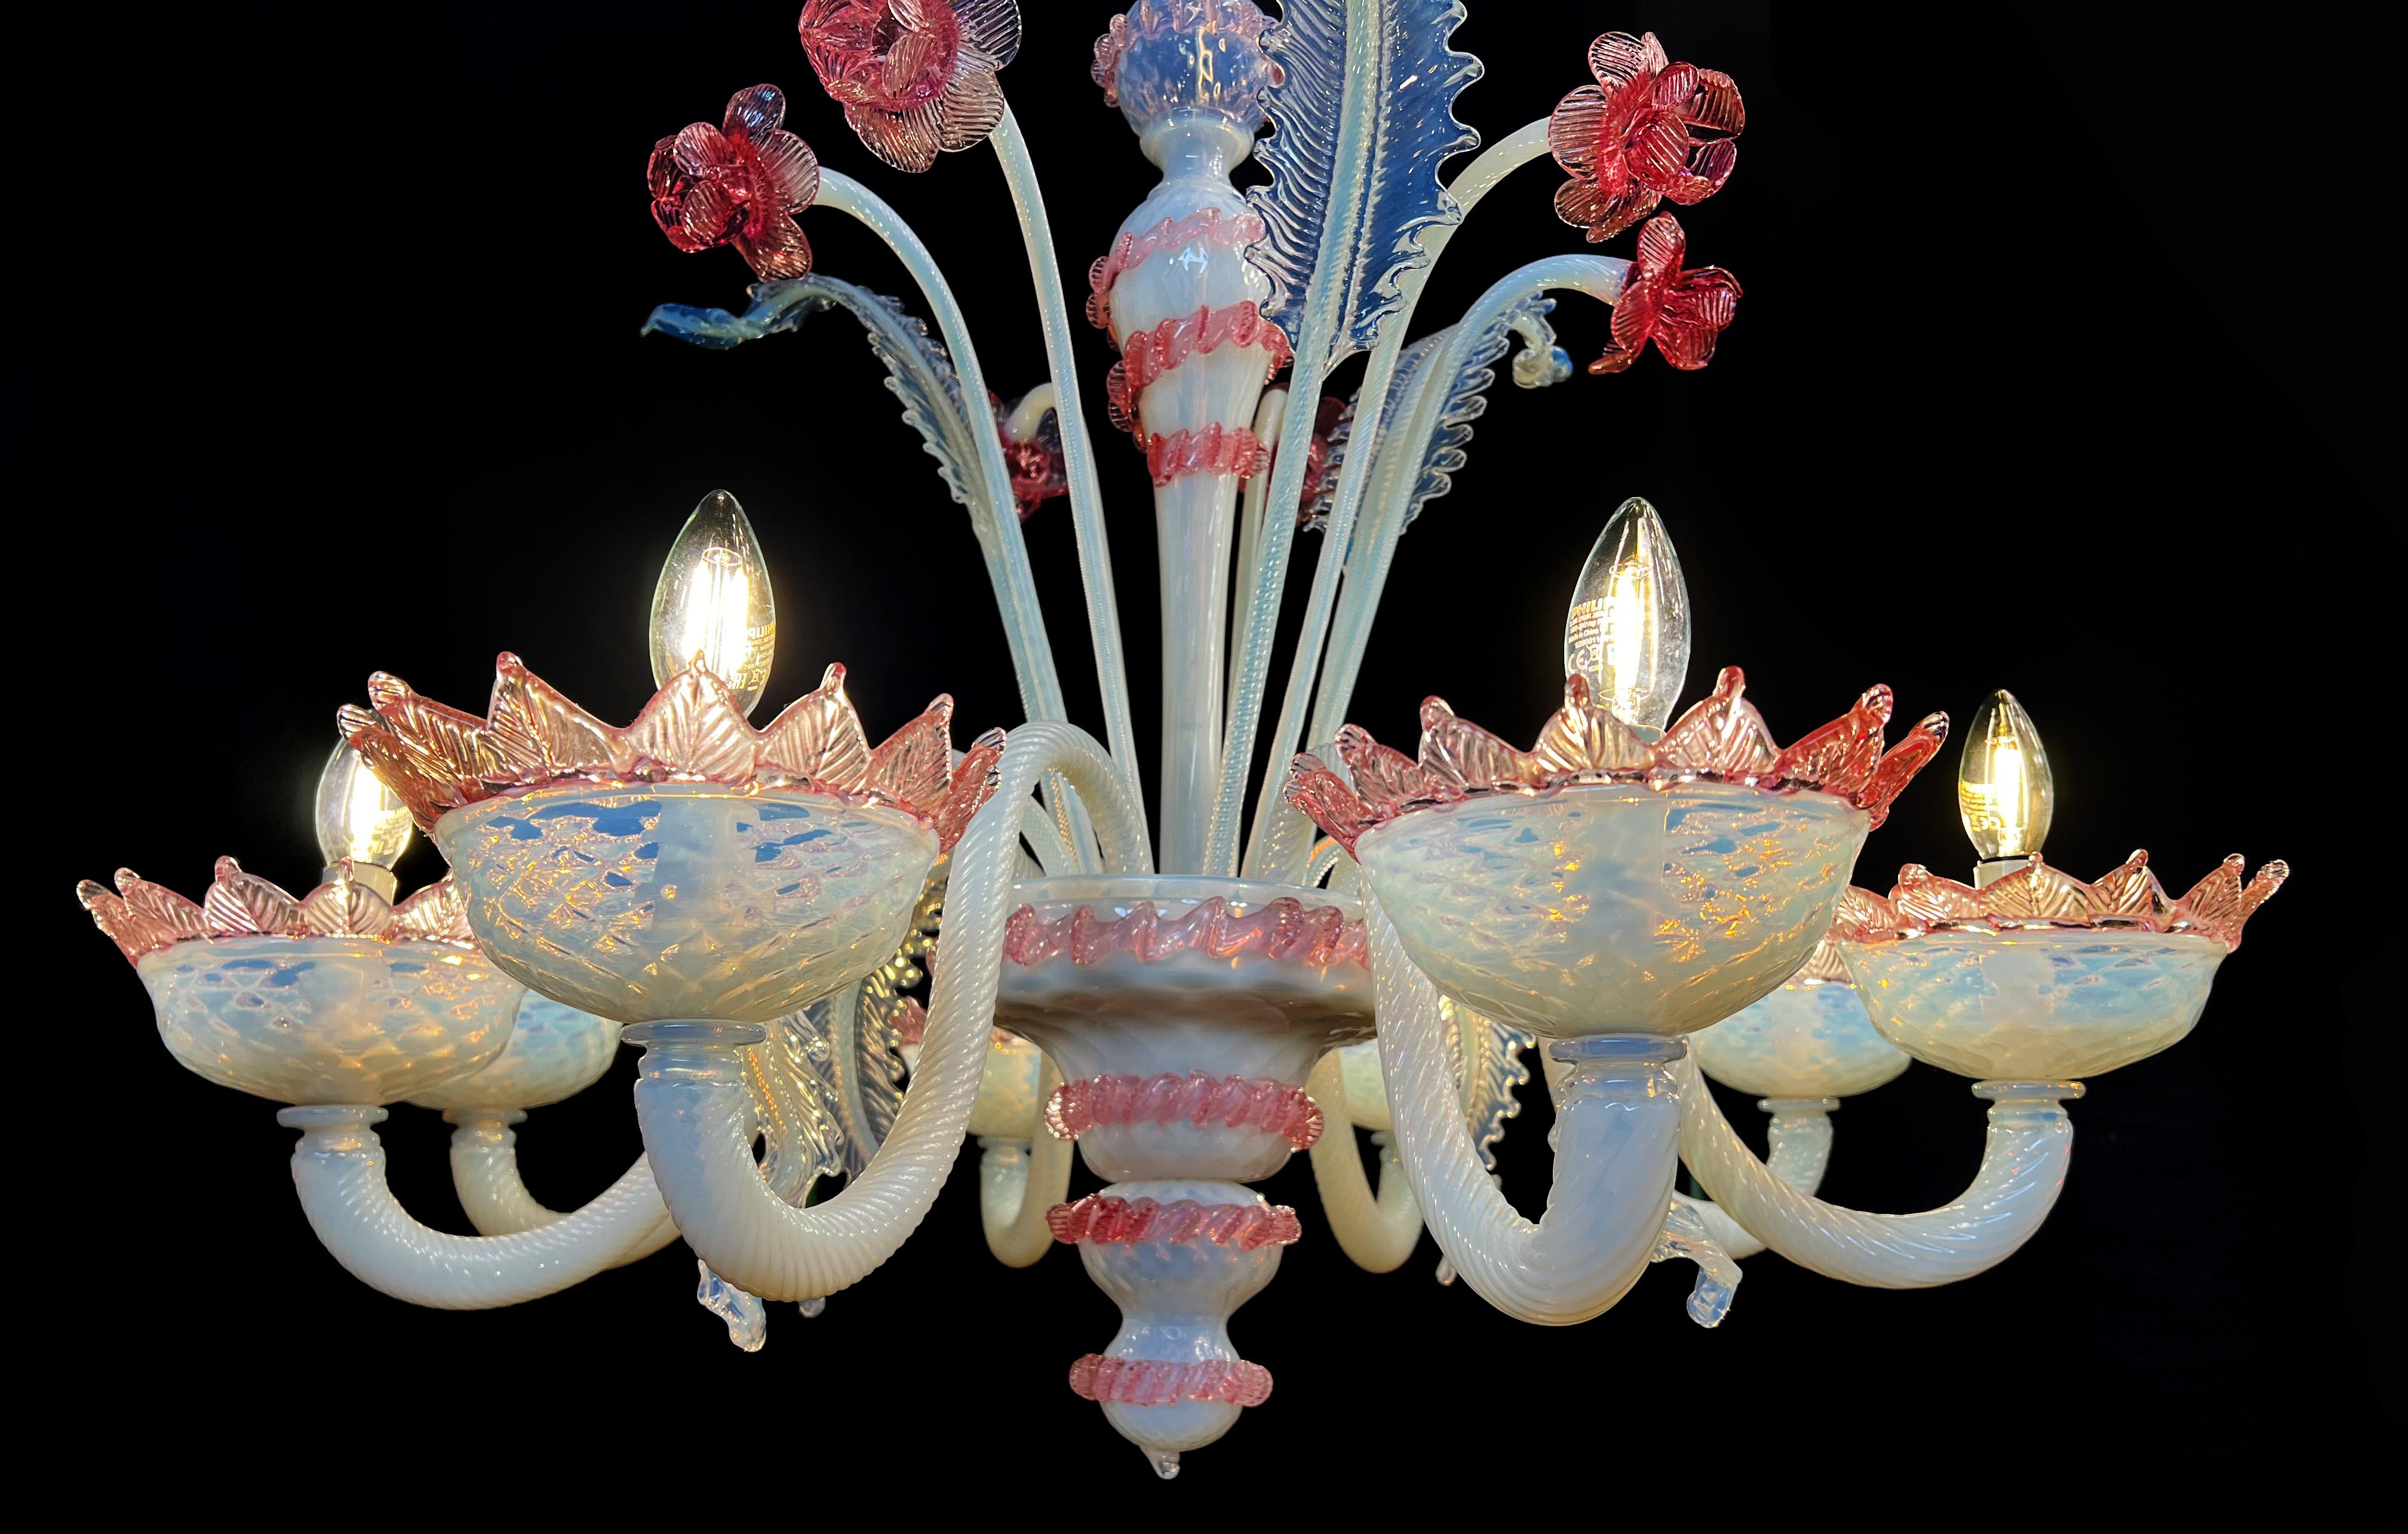 Stunning Trio Light Blue and Pink Venetian Chandeliers, Murano, 1950s For Sale 4